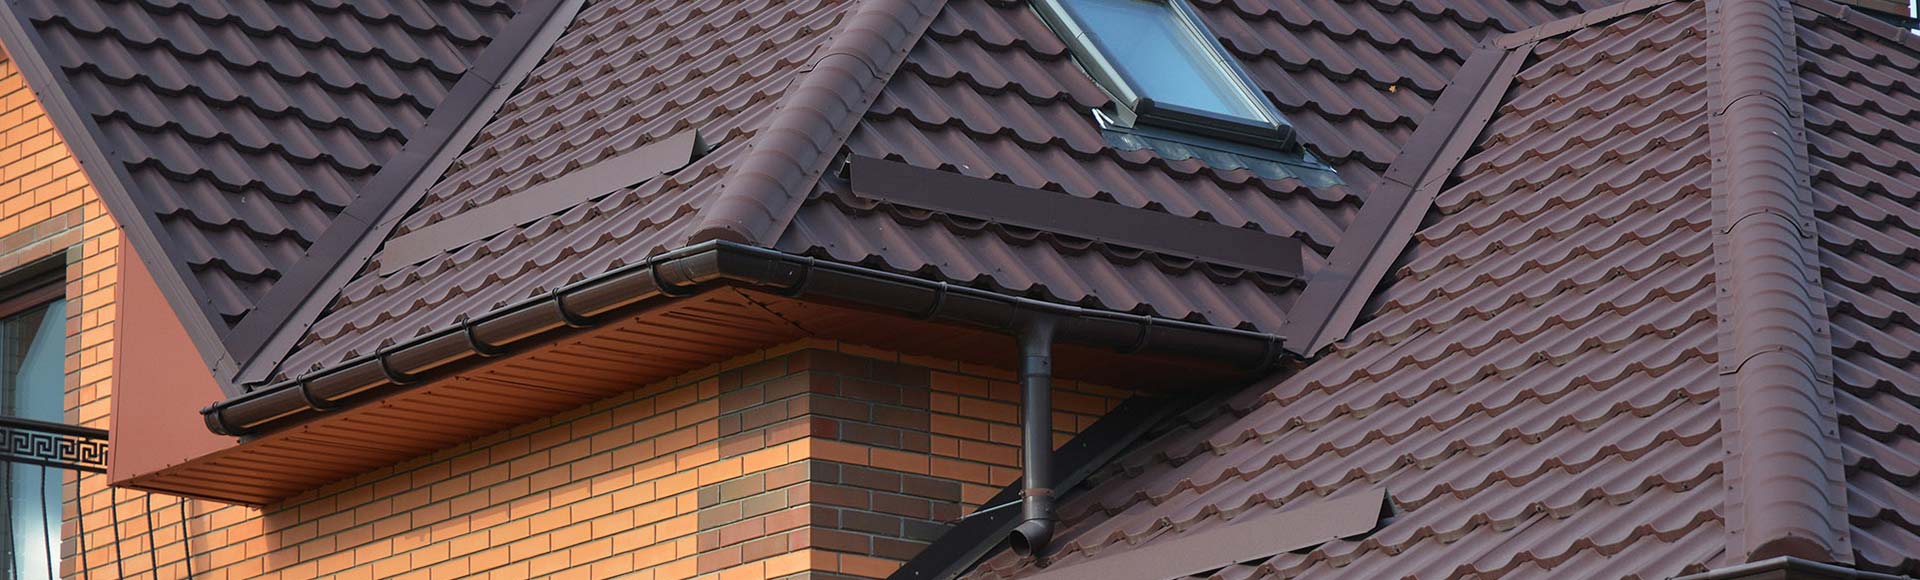 Sarasota Roofing Contractor, Metal Roofing and Roof Repair